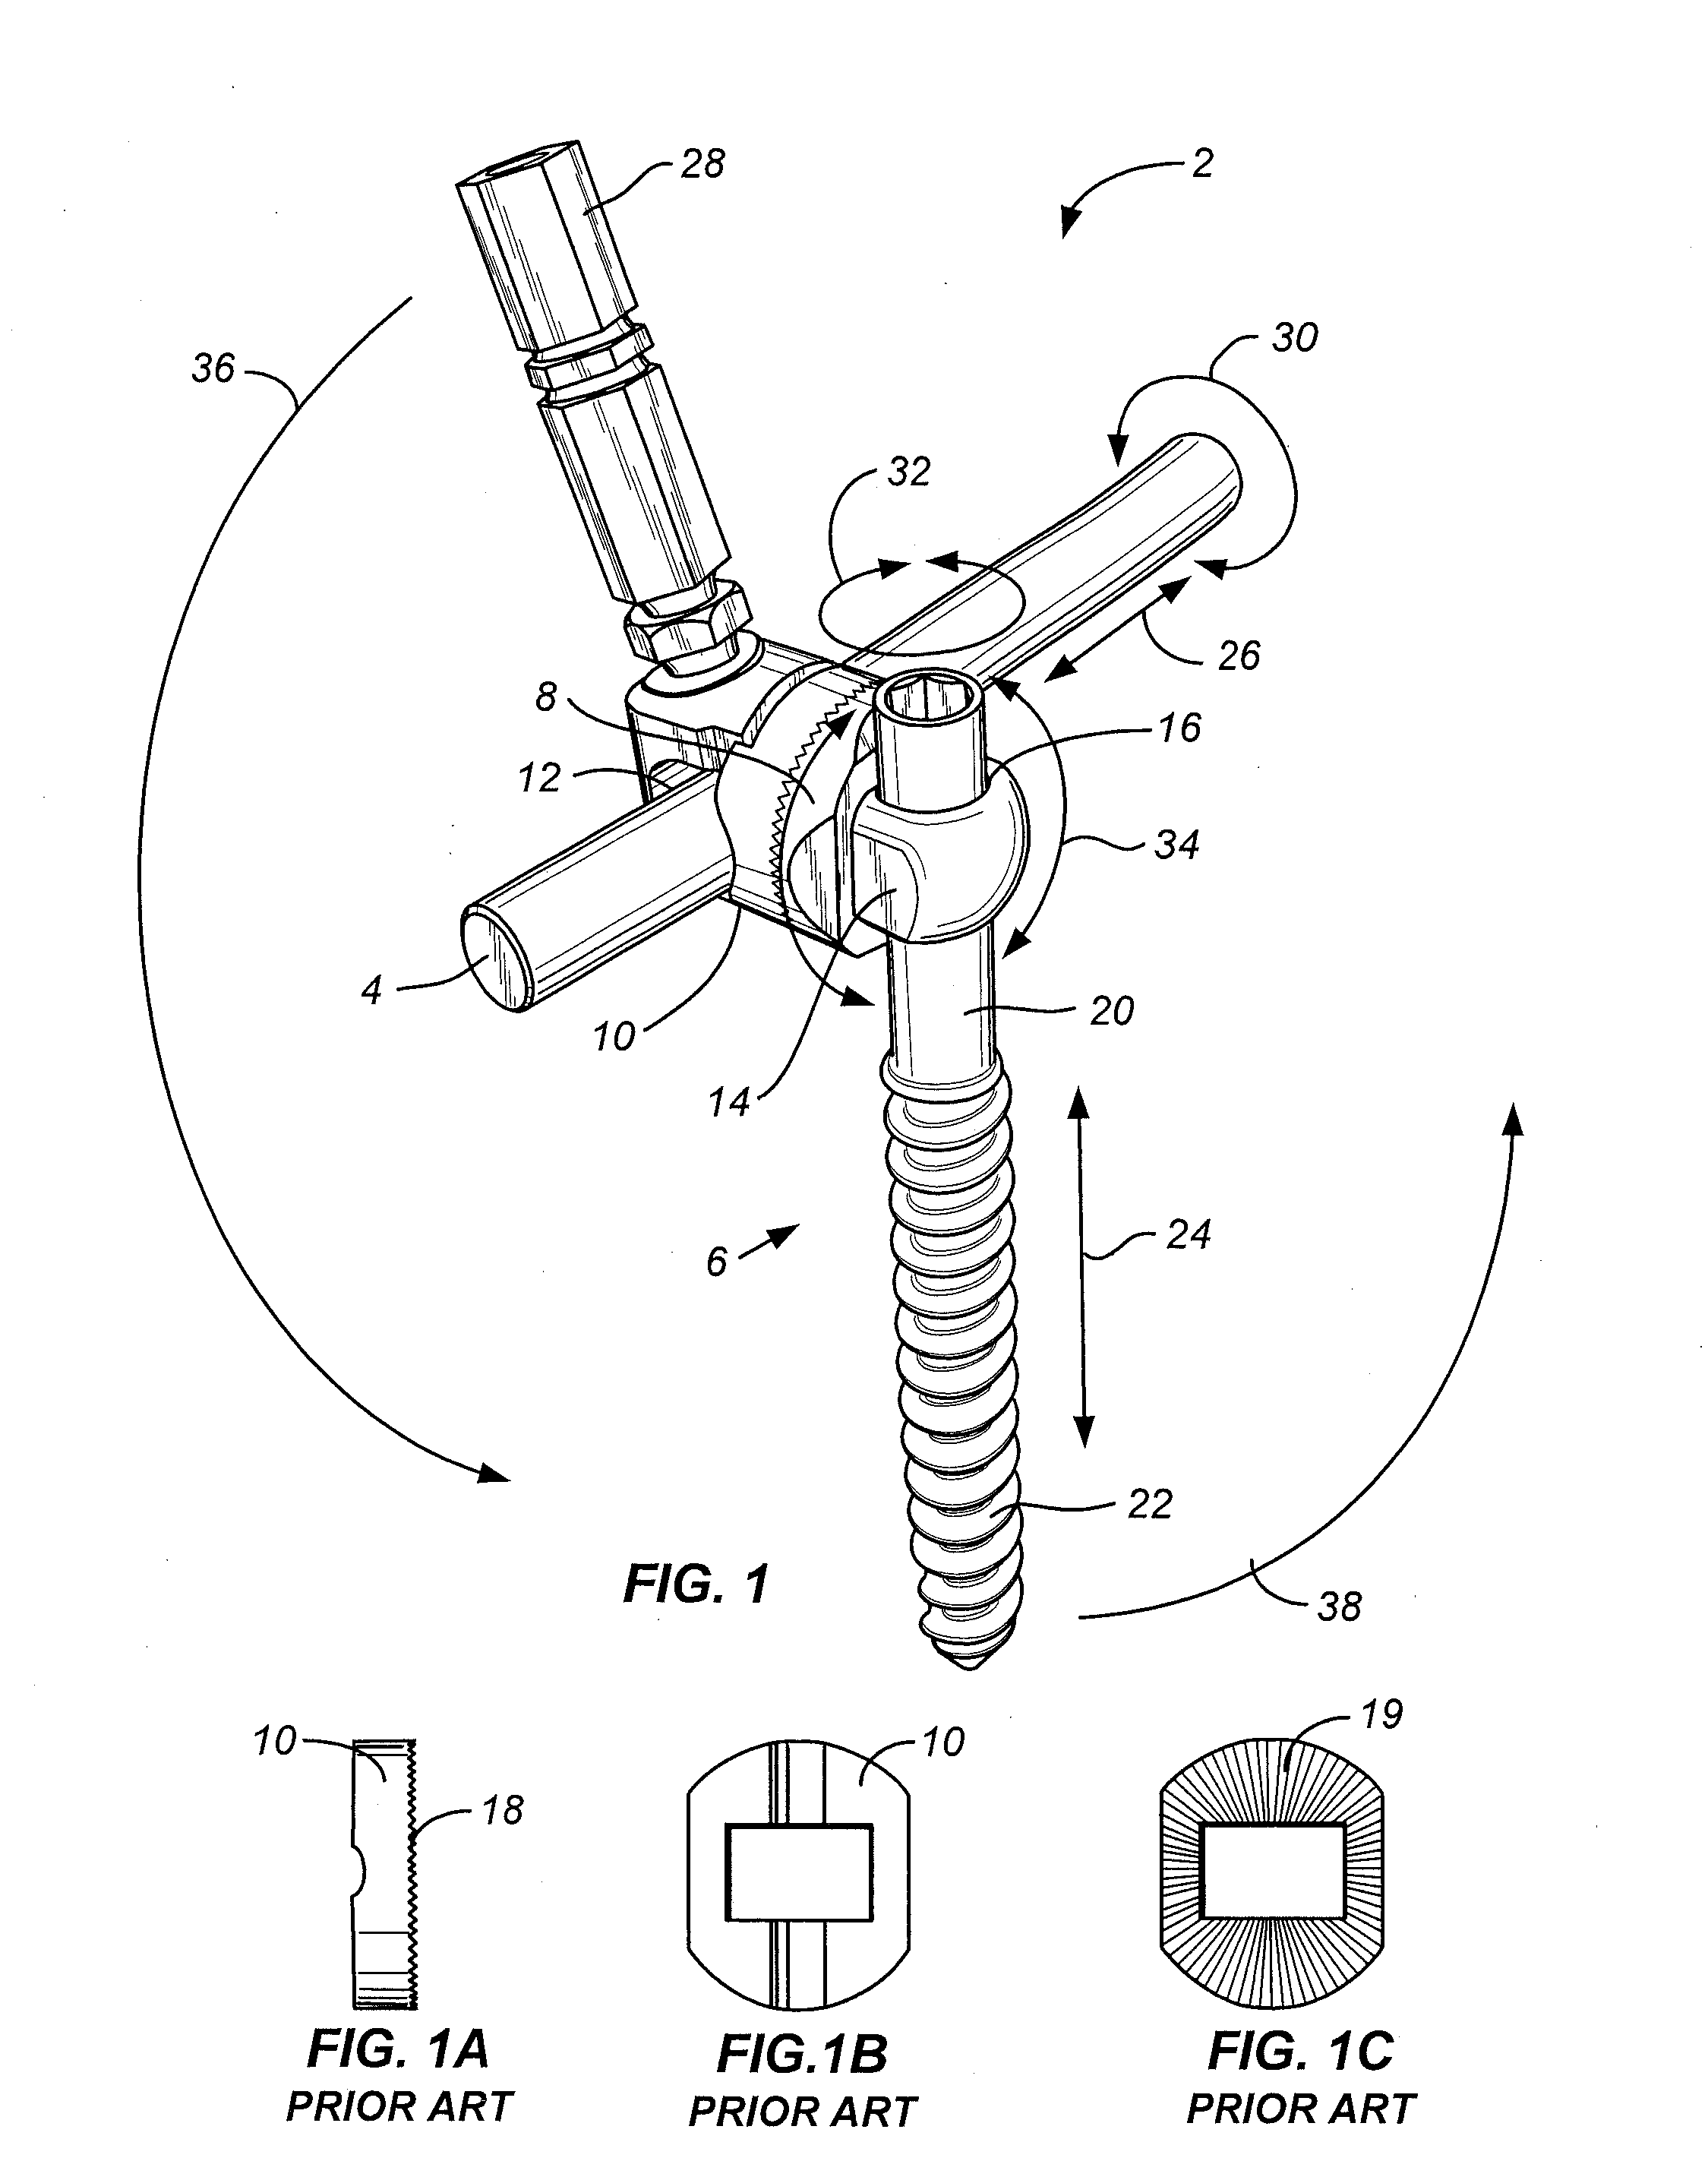 Spinal rod and bone screw caps for spinal systems assemblies